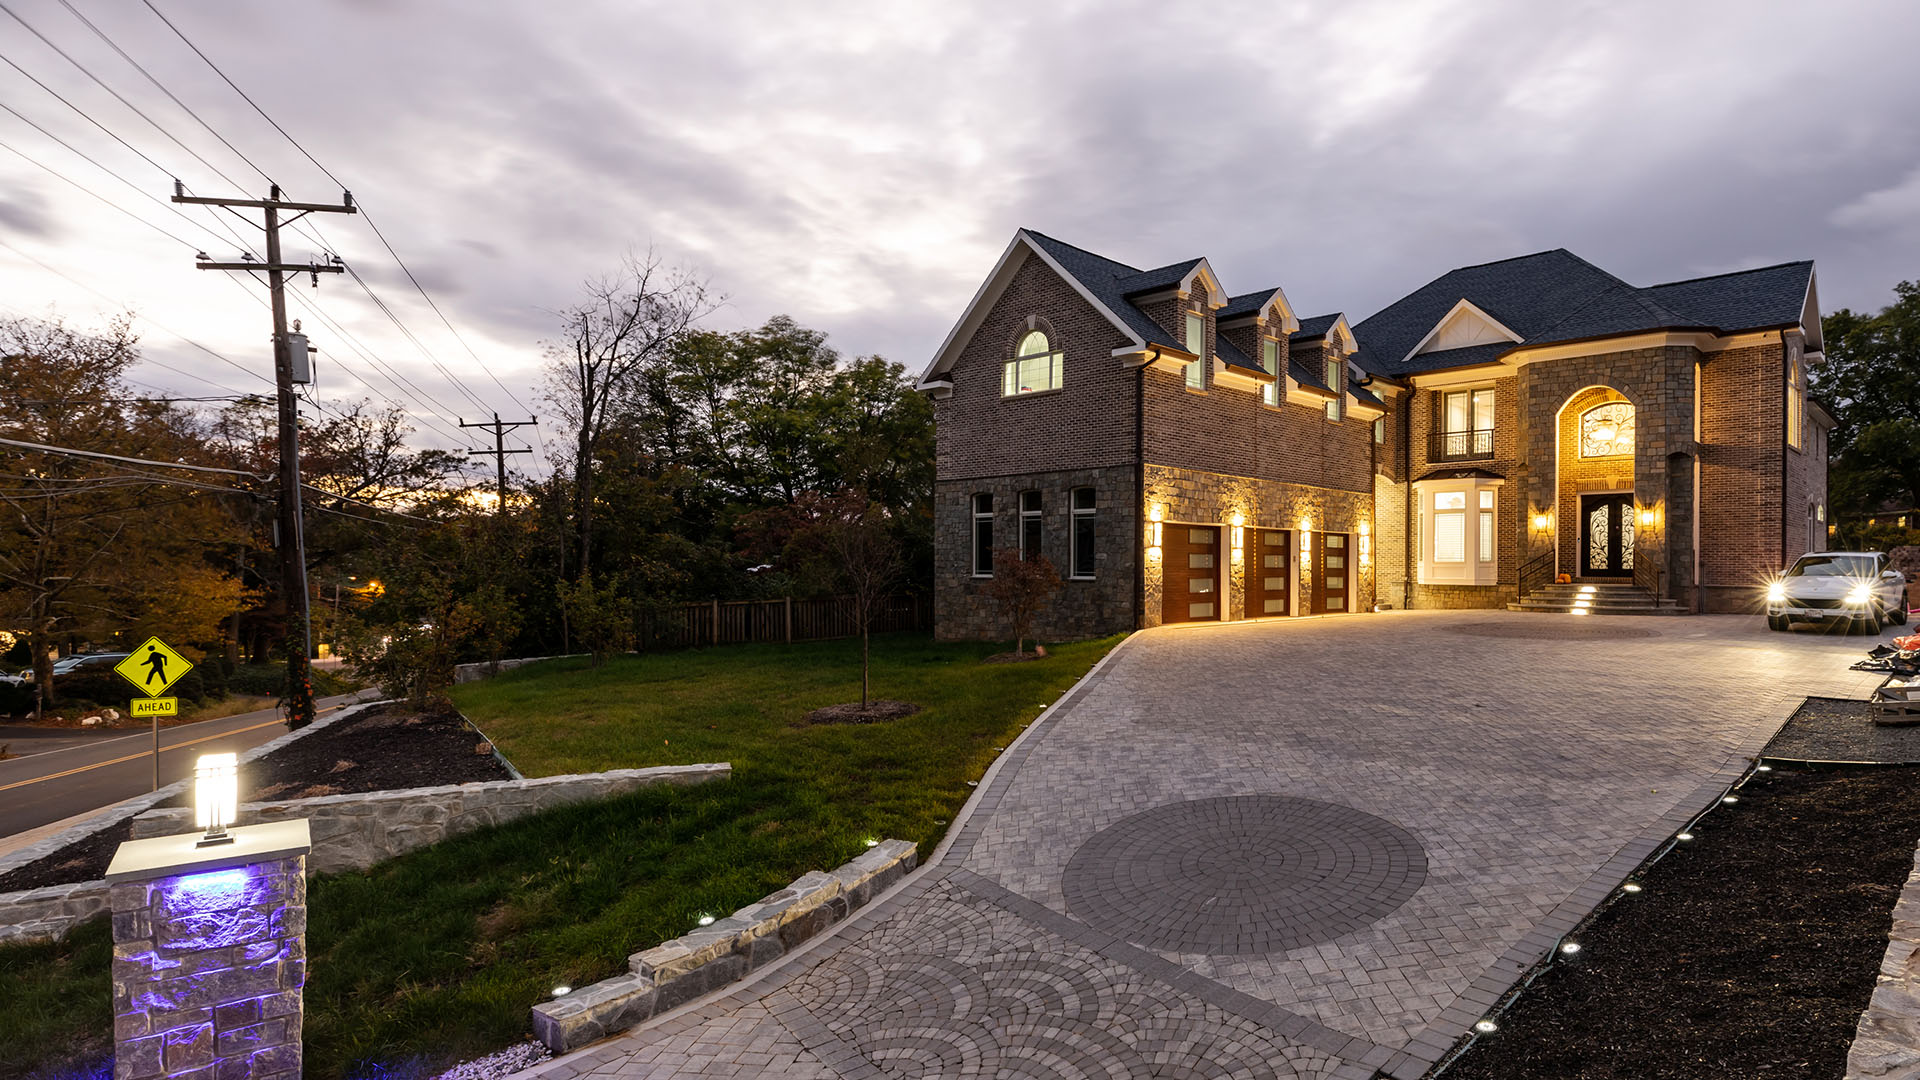 2022 PRO Mid Atlantic Remodeler of the Year, Grand Award New Custom Home 7001 sq. ft. and Over